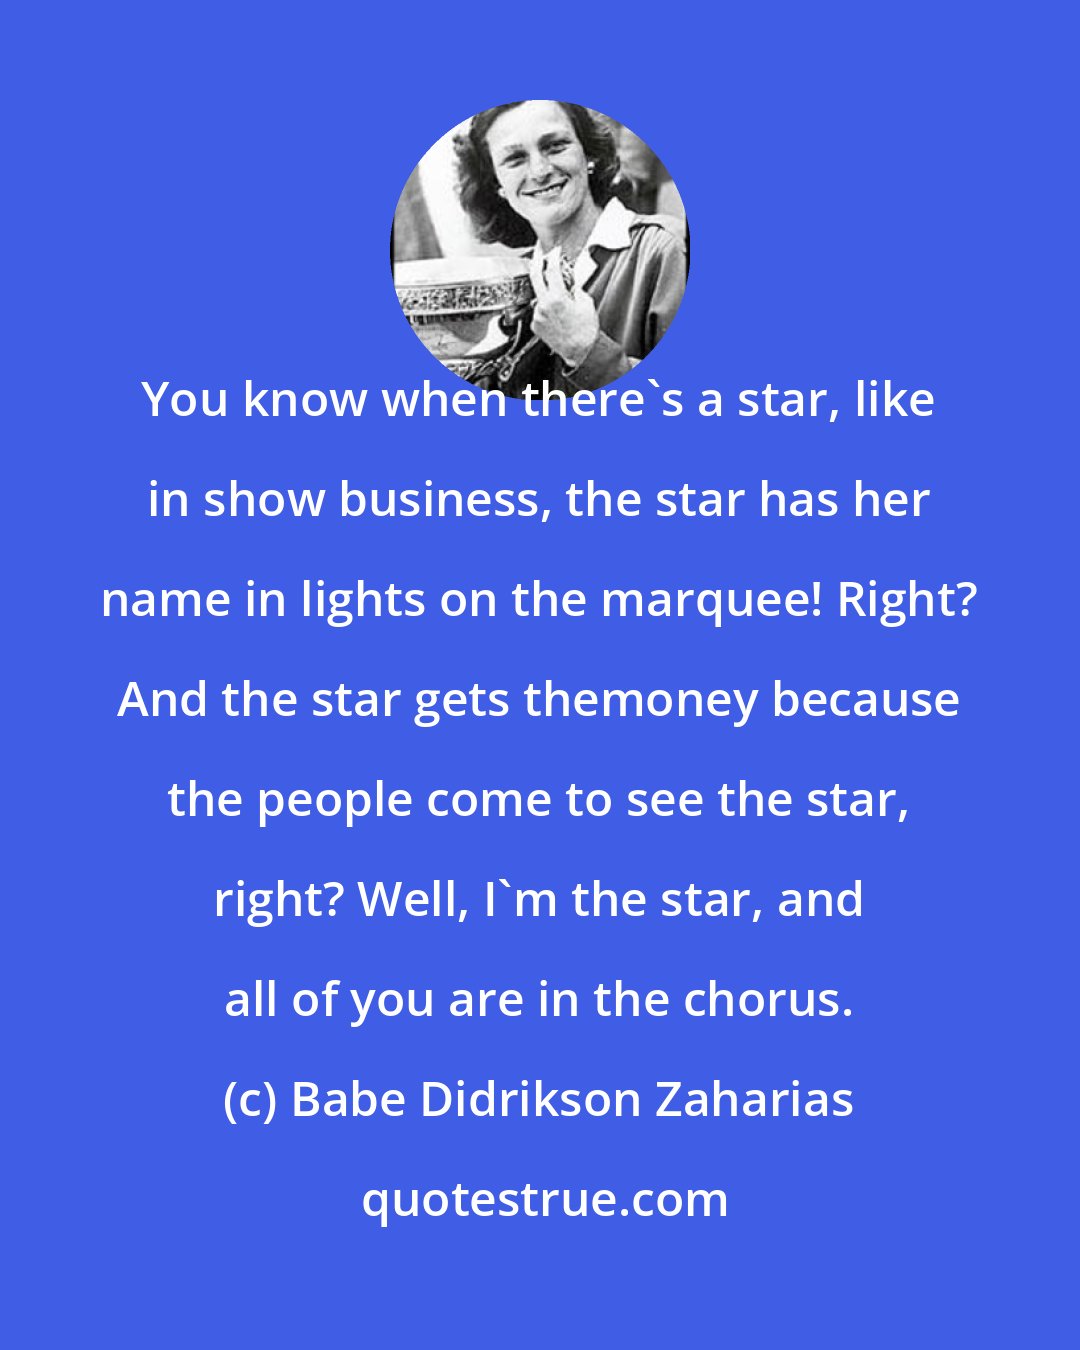 Babe Didrikson Zaharias: You know when there's a star, like in show business, the star has her name in lights on the marquee! Right? And the star gets themoney because the people come to see the star, right? Well, I'm the star, and all of you are in the chorus.